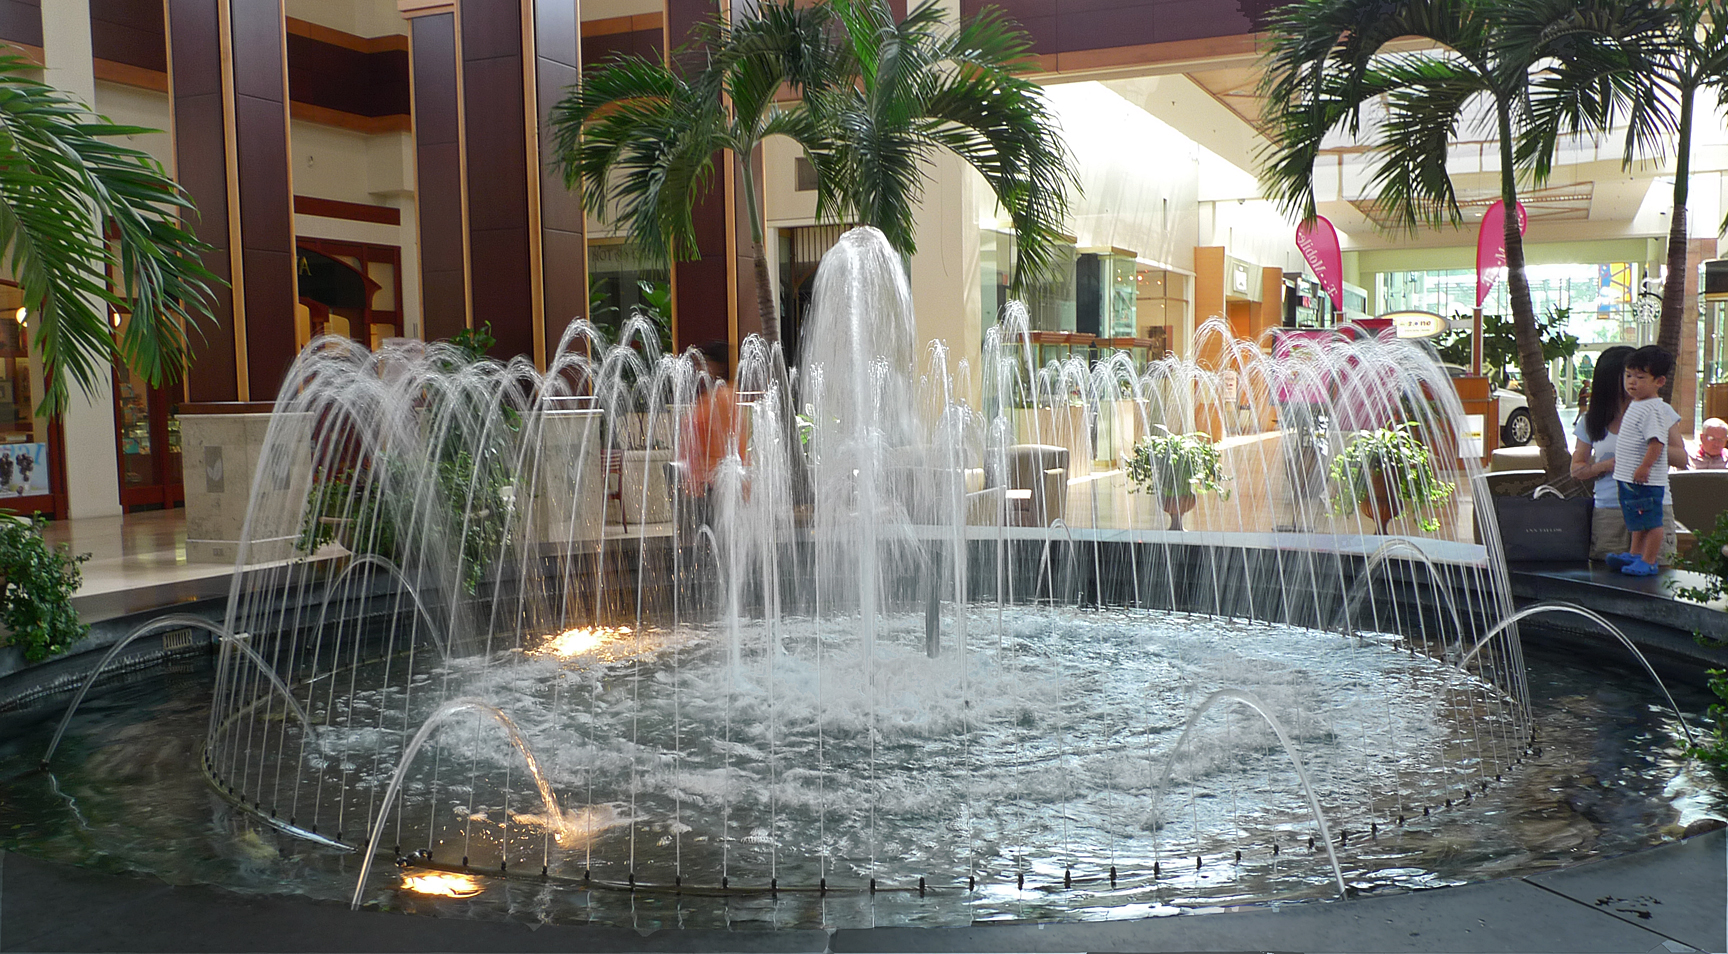 MALL FOUNTAIN  -  HAND-HELD @ 1/10 SECOND